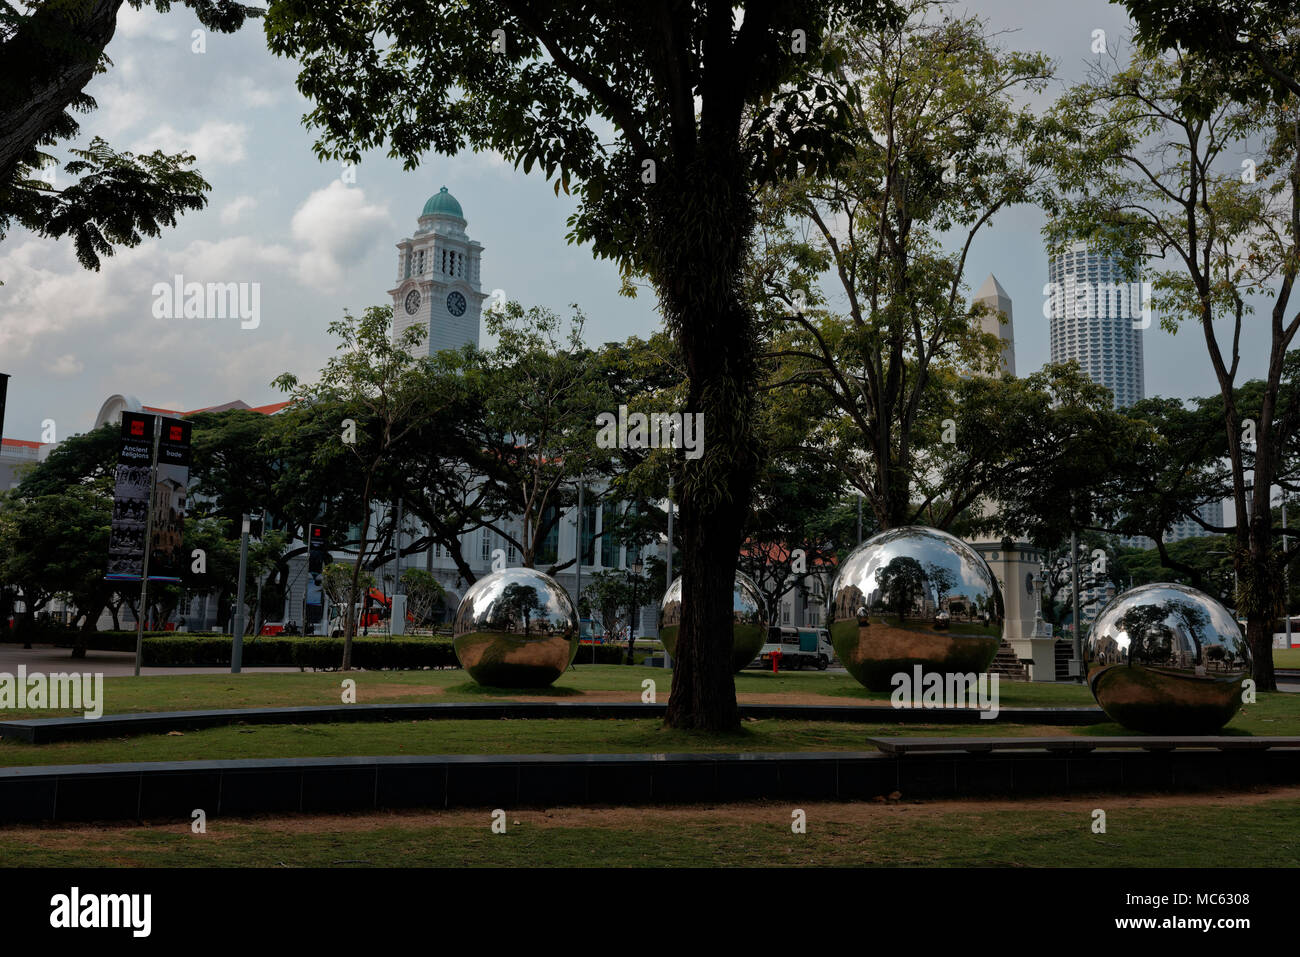 Large polished balls, part of the 50th anniversary celebration, art in Singapore Stock Photo